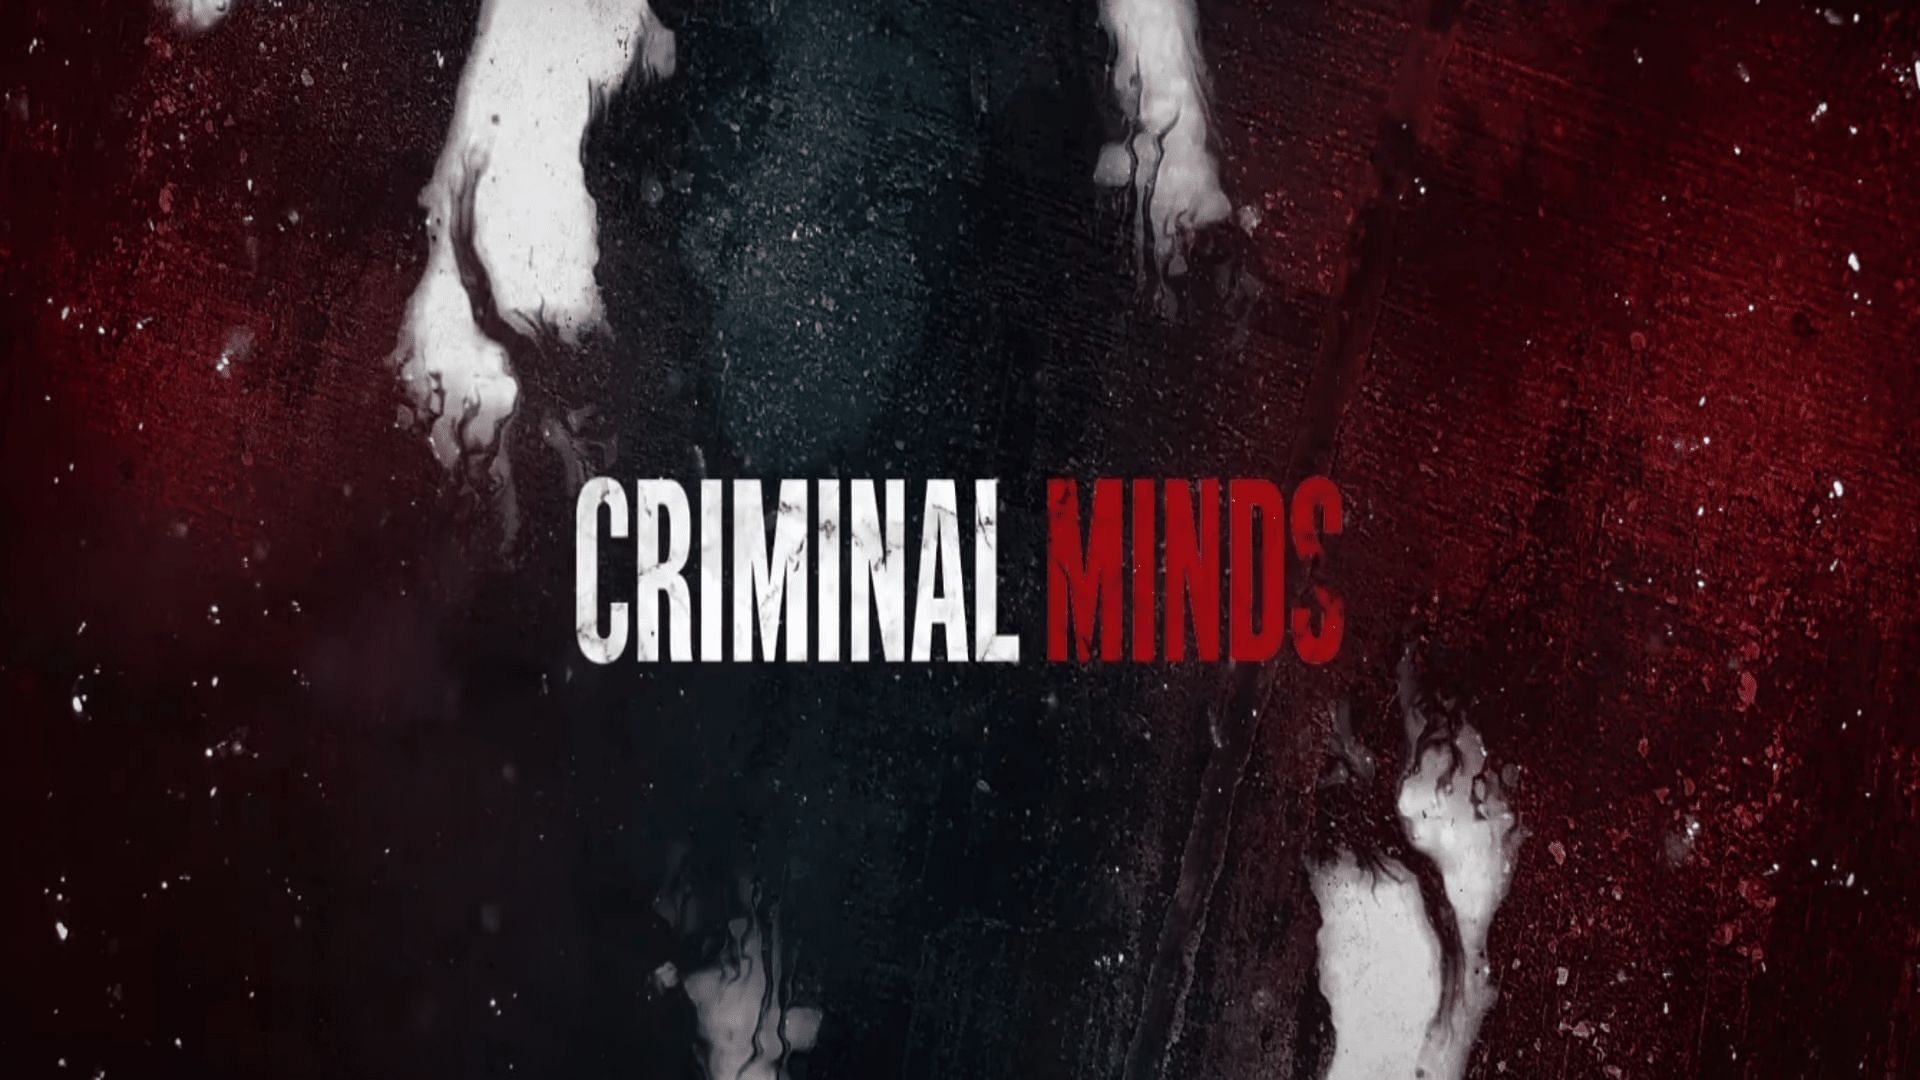 Tracker fans can also watch Criminal Minds (Image by TV Promos)